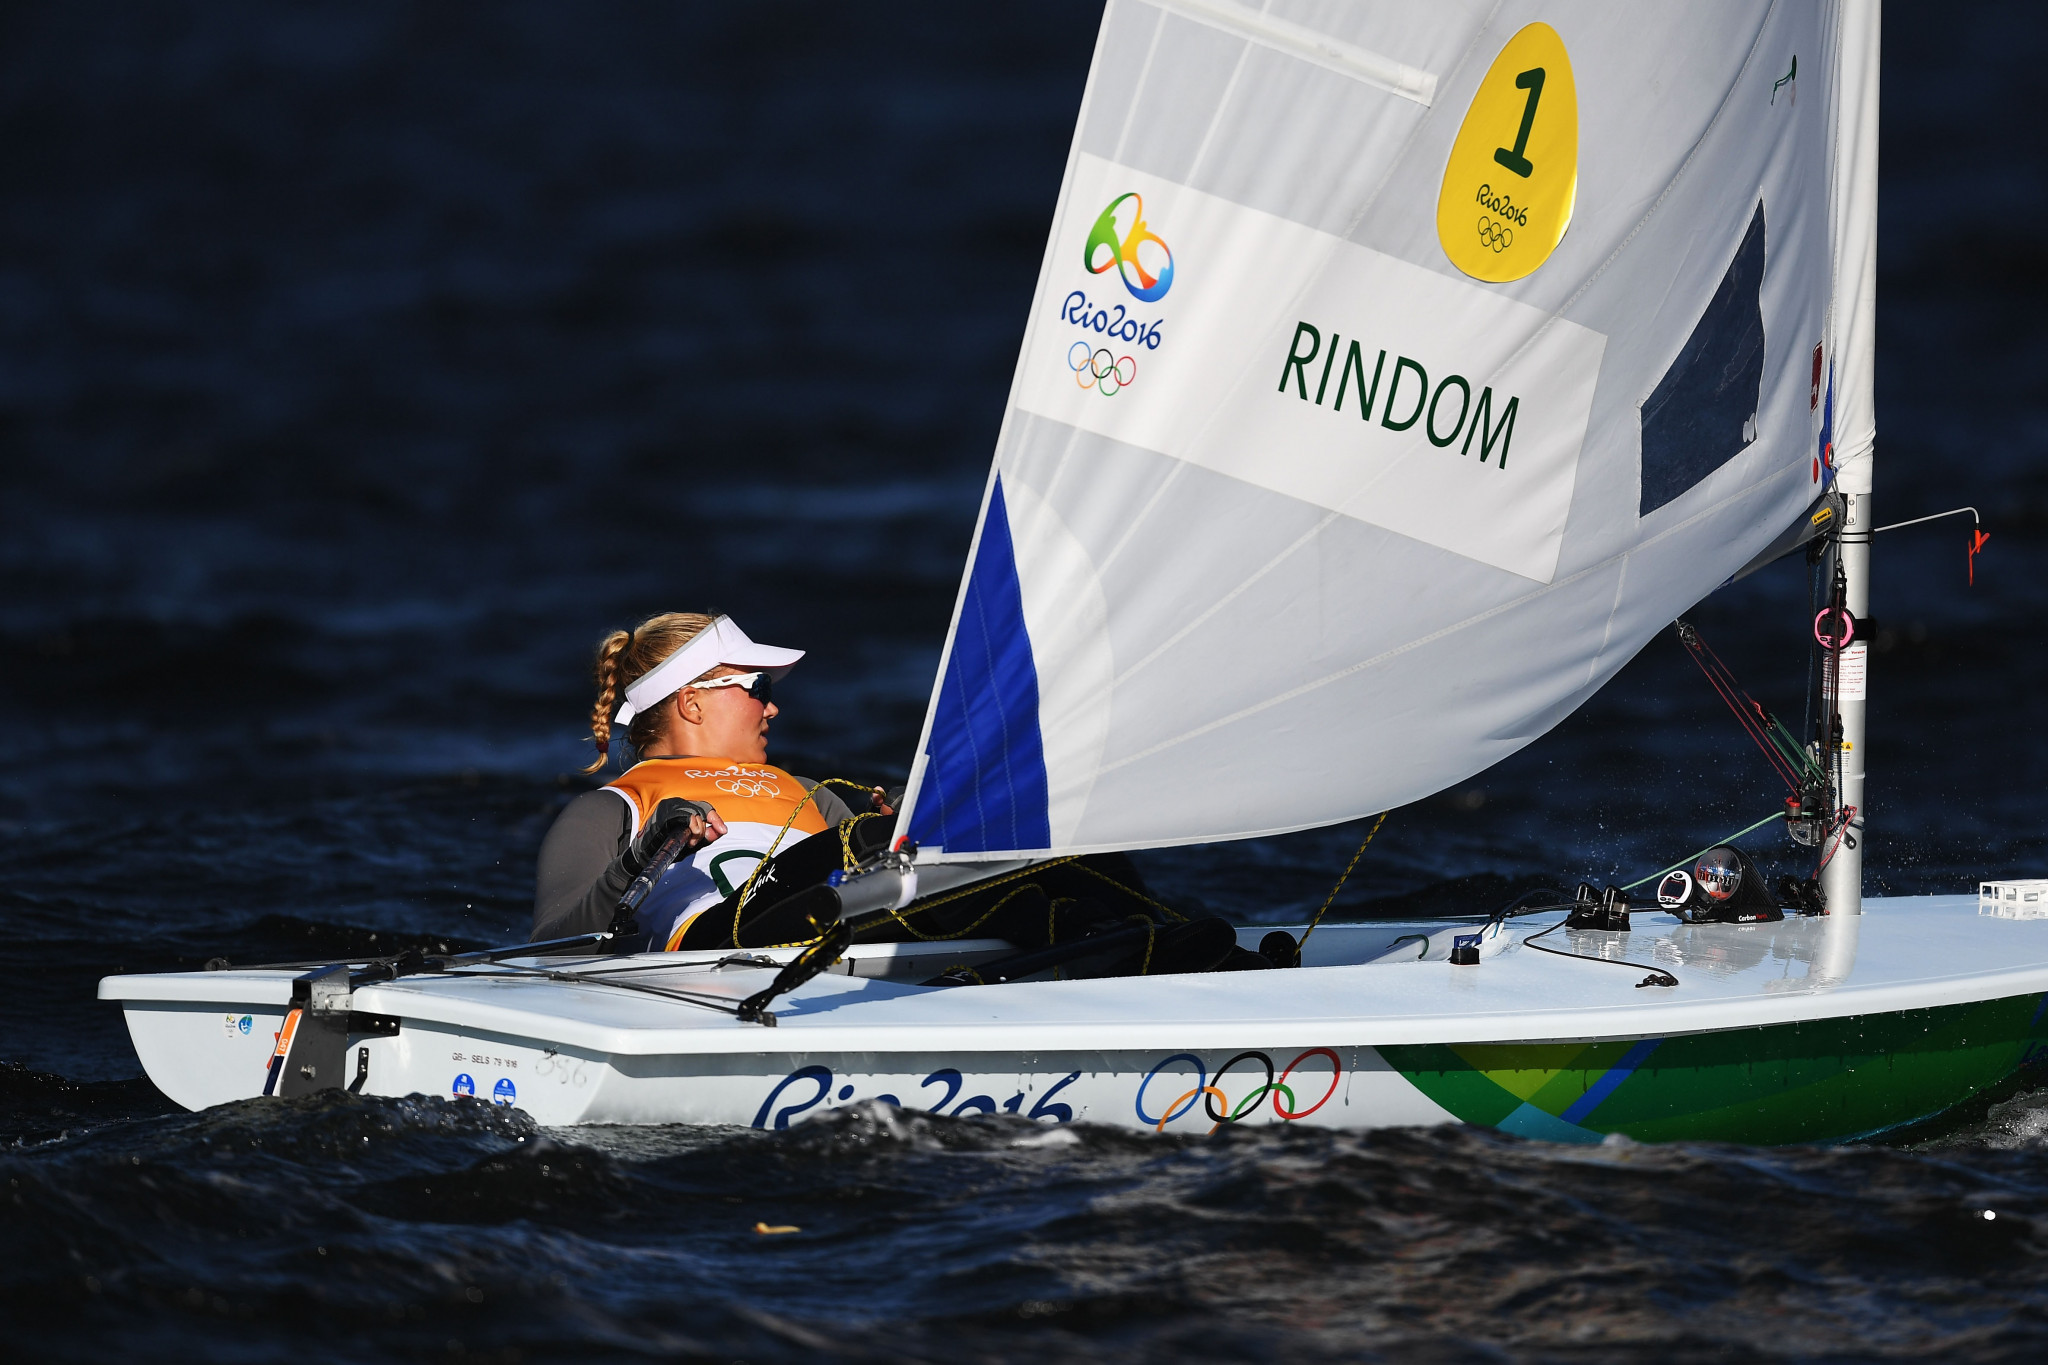 Defending champion Anne-Marie Rindom has moved to the top of the leaderboard at the ILCA Laser Radial Women's World Championship in Melbourne ©Getty Images